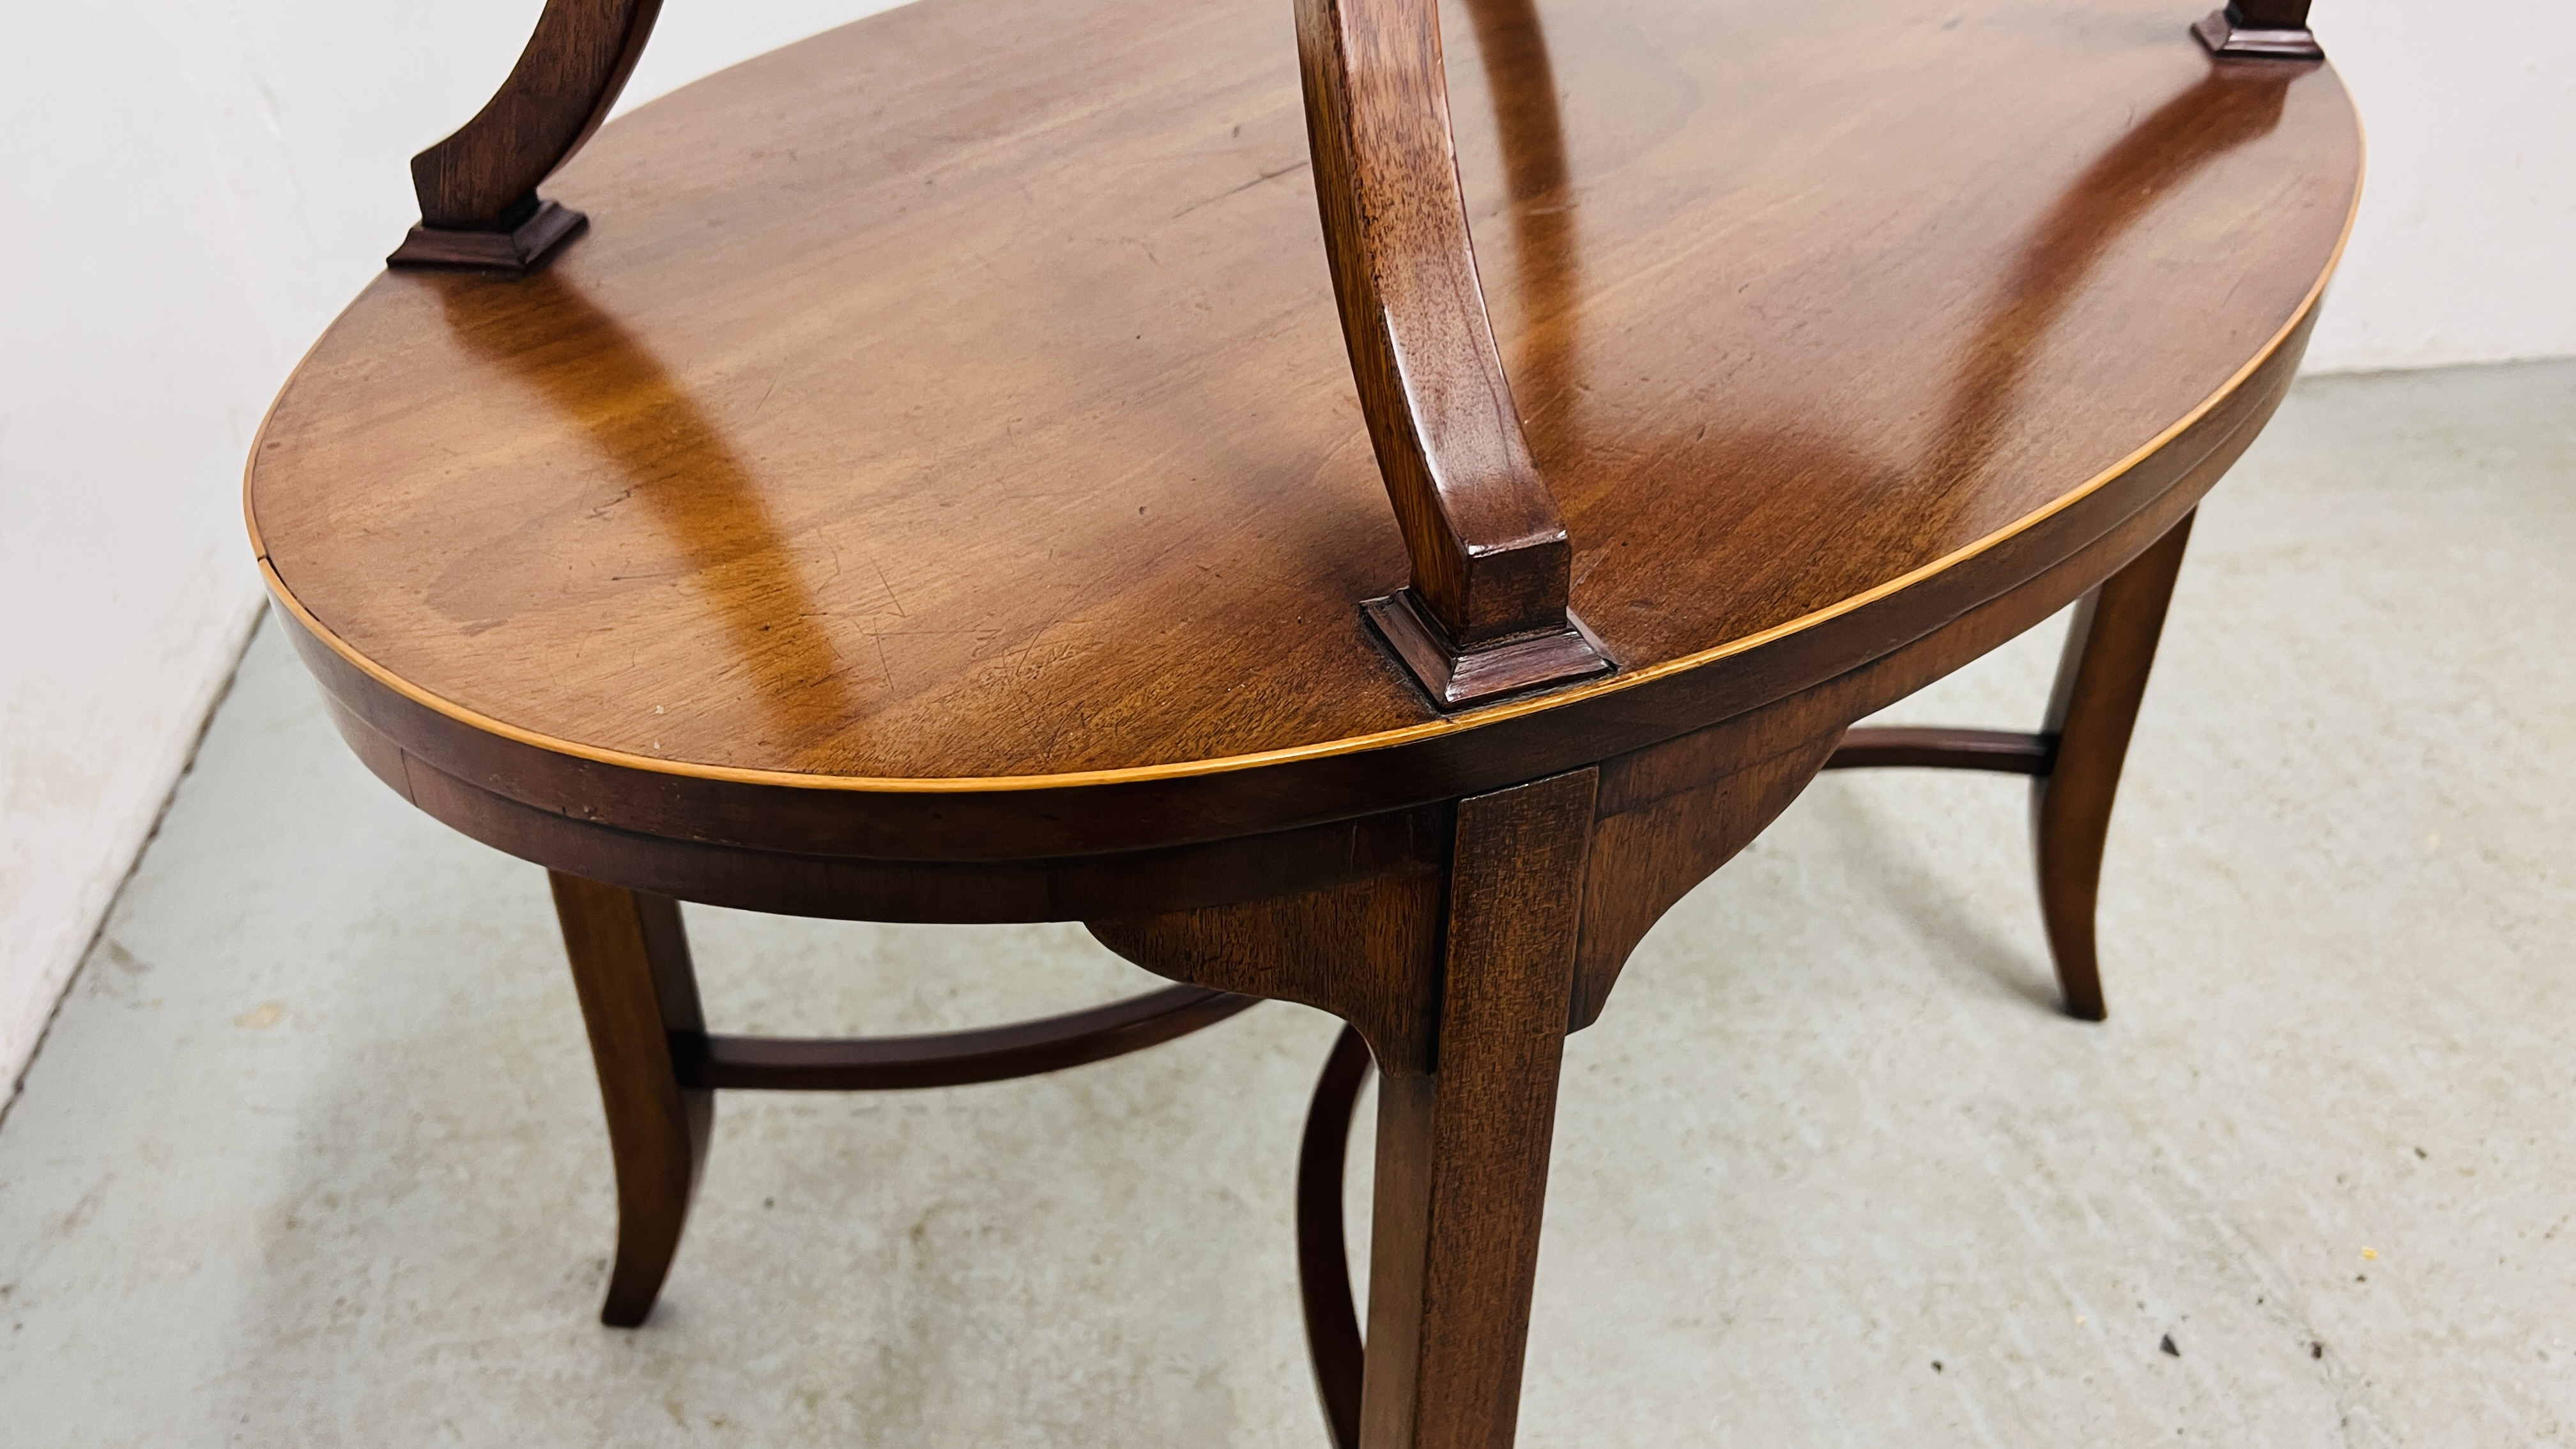 VINTAGE OVAL MAHOGANY FINISH TWO TIER OCCASIONAL TABLE WIDTH 88CM. DEPTH 55CM. HEIGHT 80CM. - Image 6 of 9